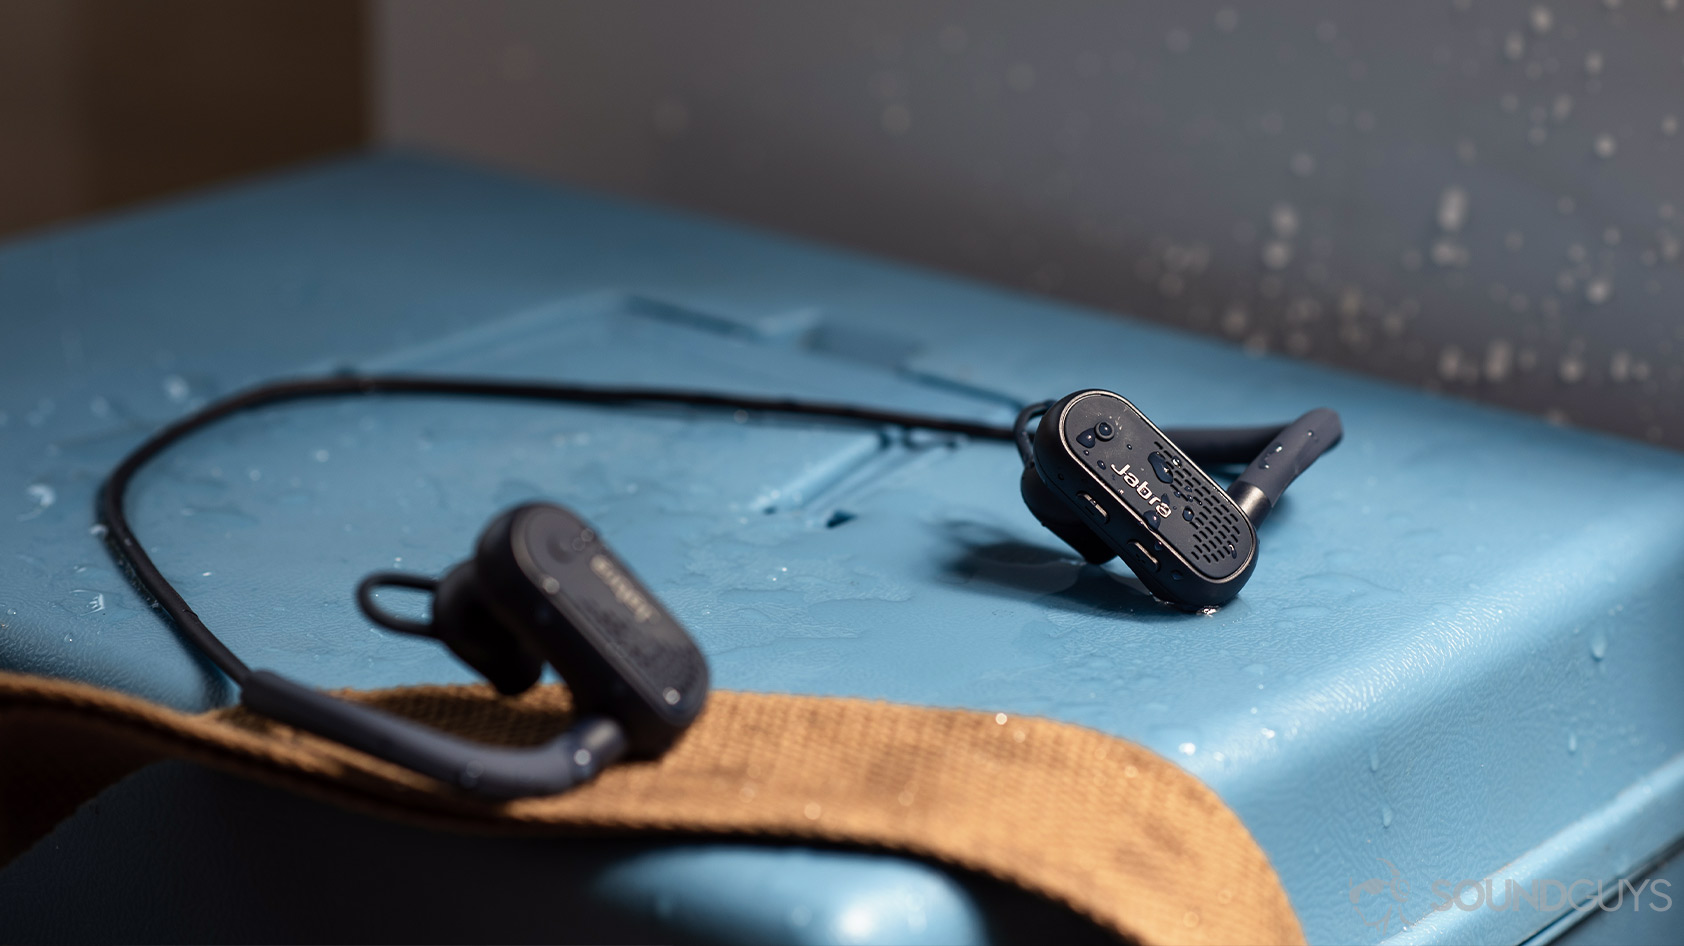 The earbuds covered in water on a blue surface.